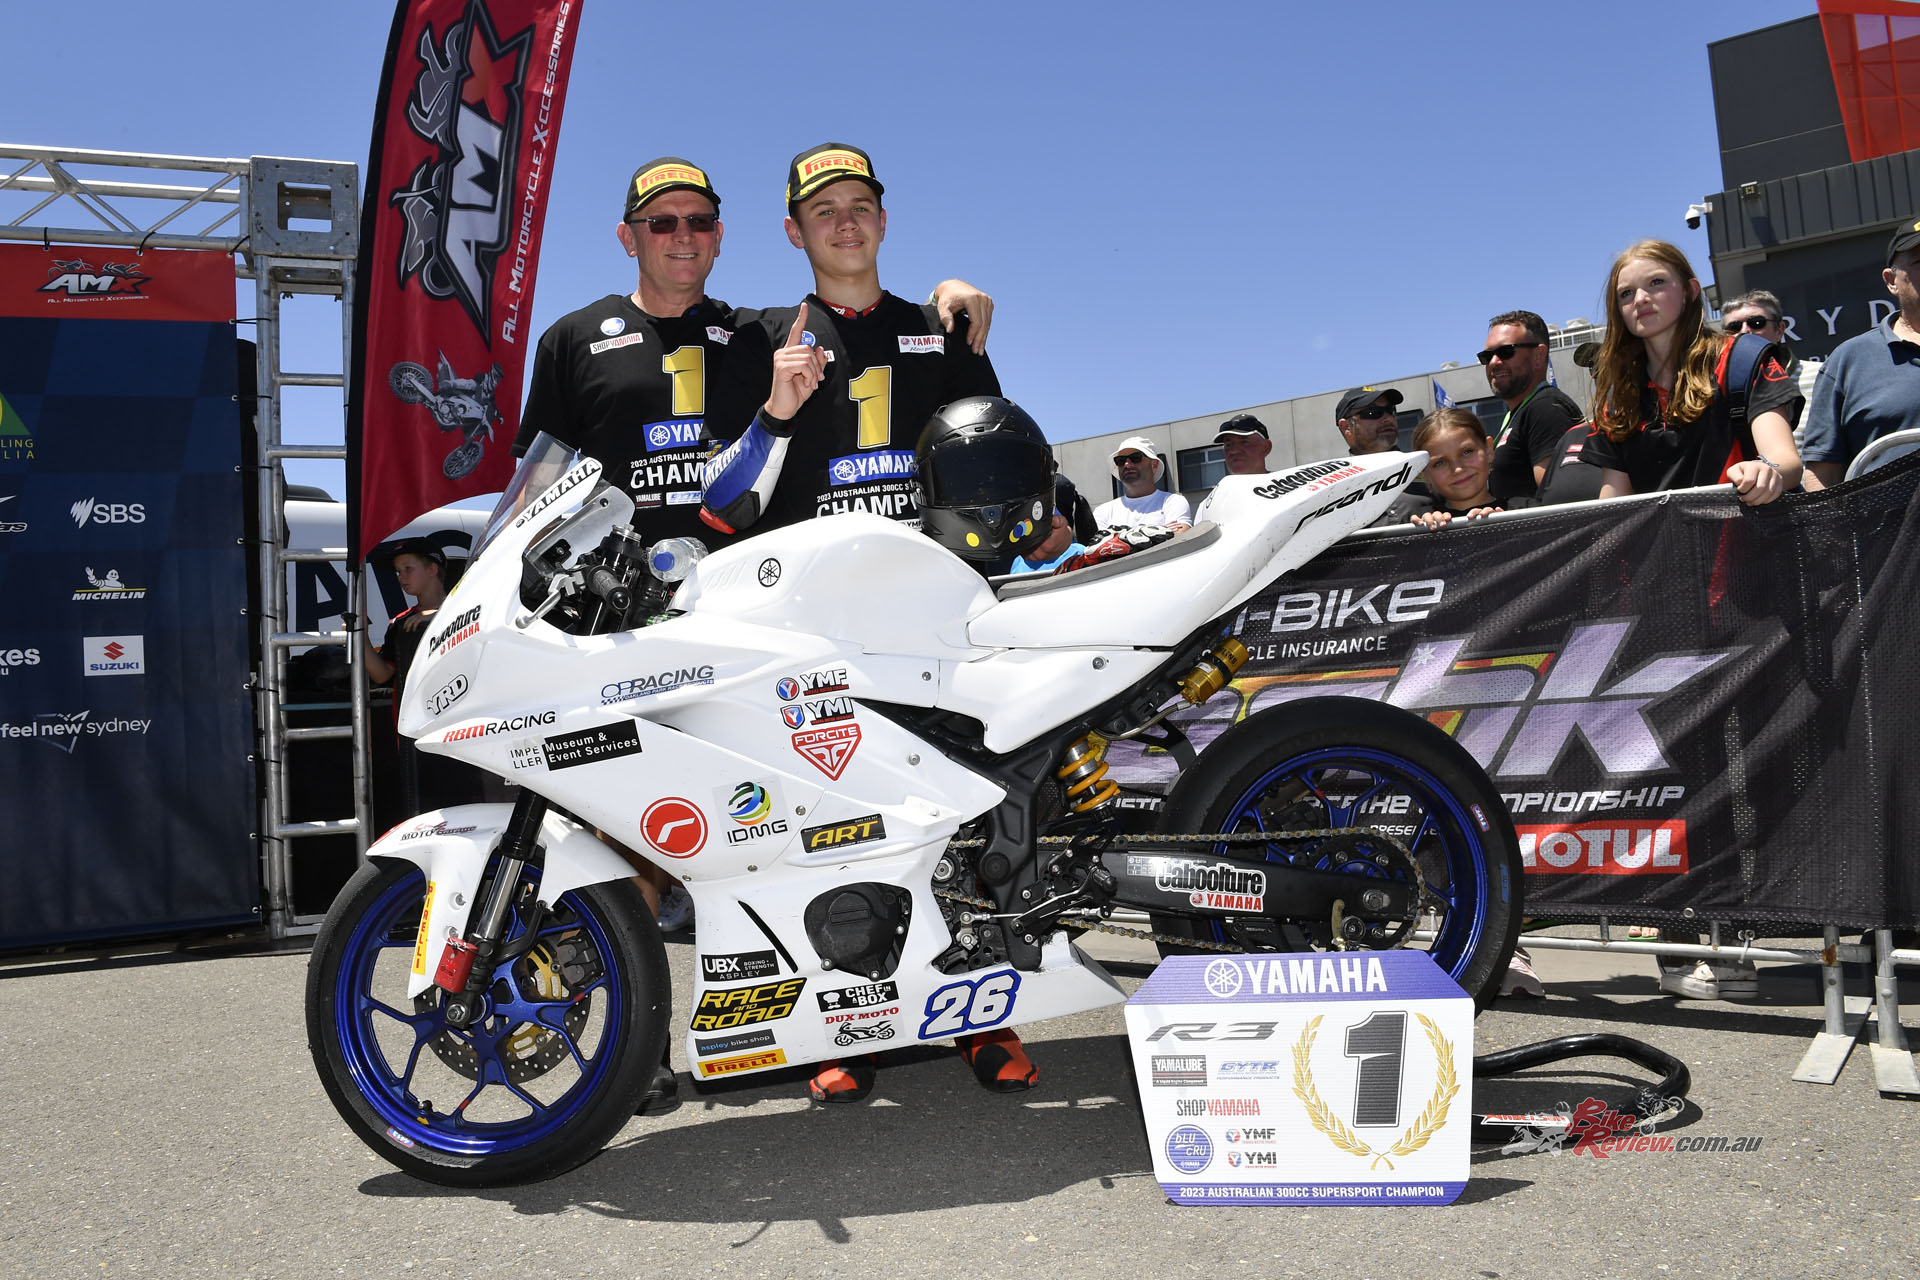 Swain wasn’t left empty-handed, though: he won the Yamaha Finance R3 Cup after 1-1-5 results over the weekend.